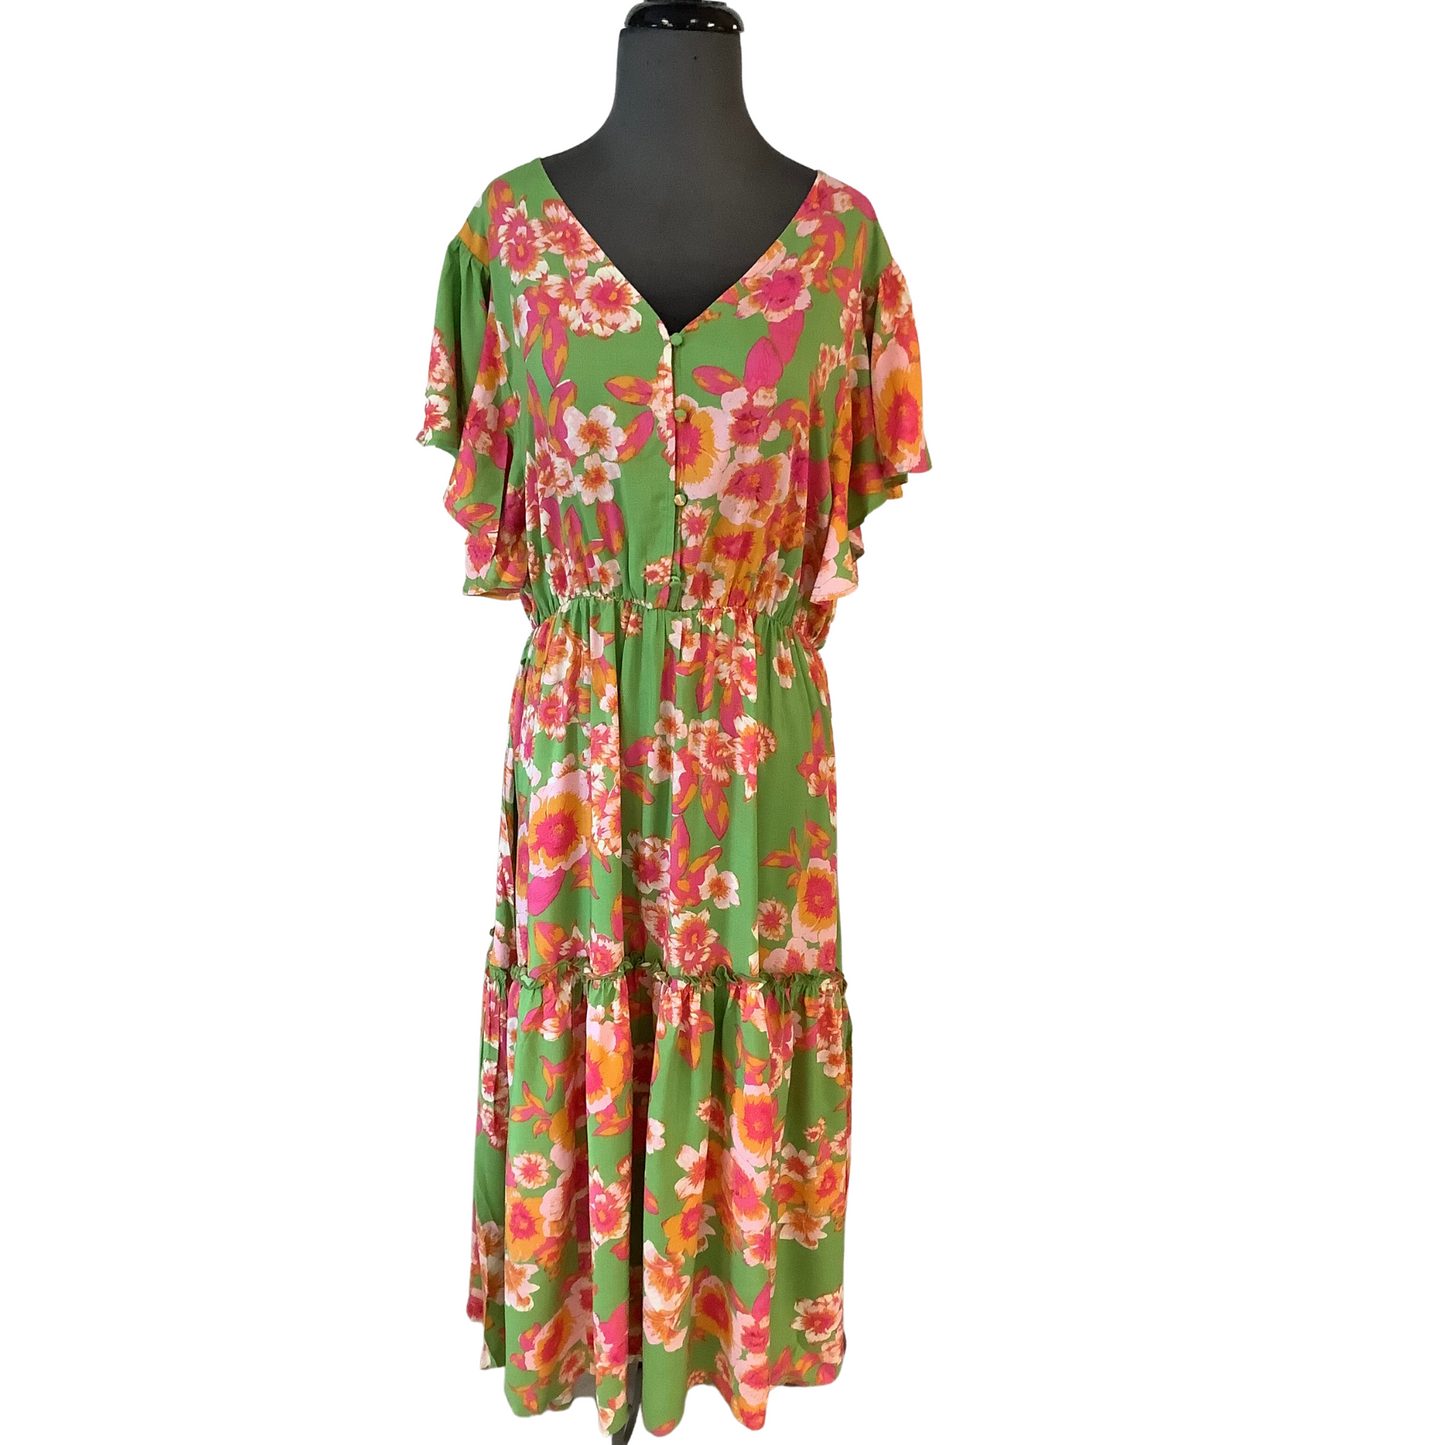 This lovely maxi dress features a v-neckline and a delicate floral print. Its striking winged sleeves and tiered skirt make it a stylish and fashionable choice for any formal occasion.  This plus size maxi dress boasts an elegant silhouette with a v-neck and short, fluttery sleeves. The tiered design creates a beautiful figure-flattering look that is perfect for any occasion.